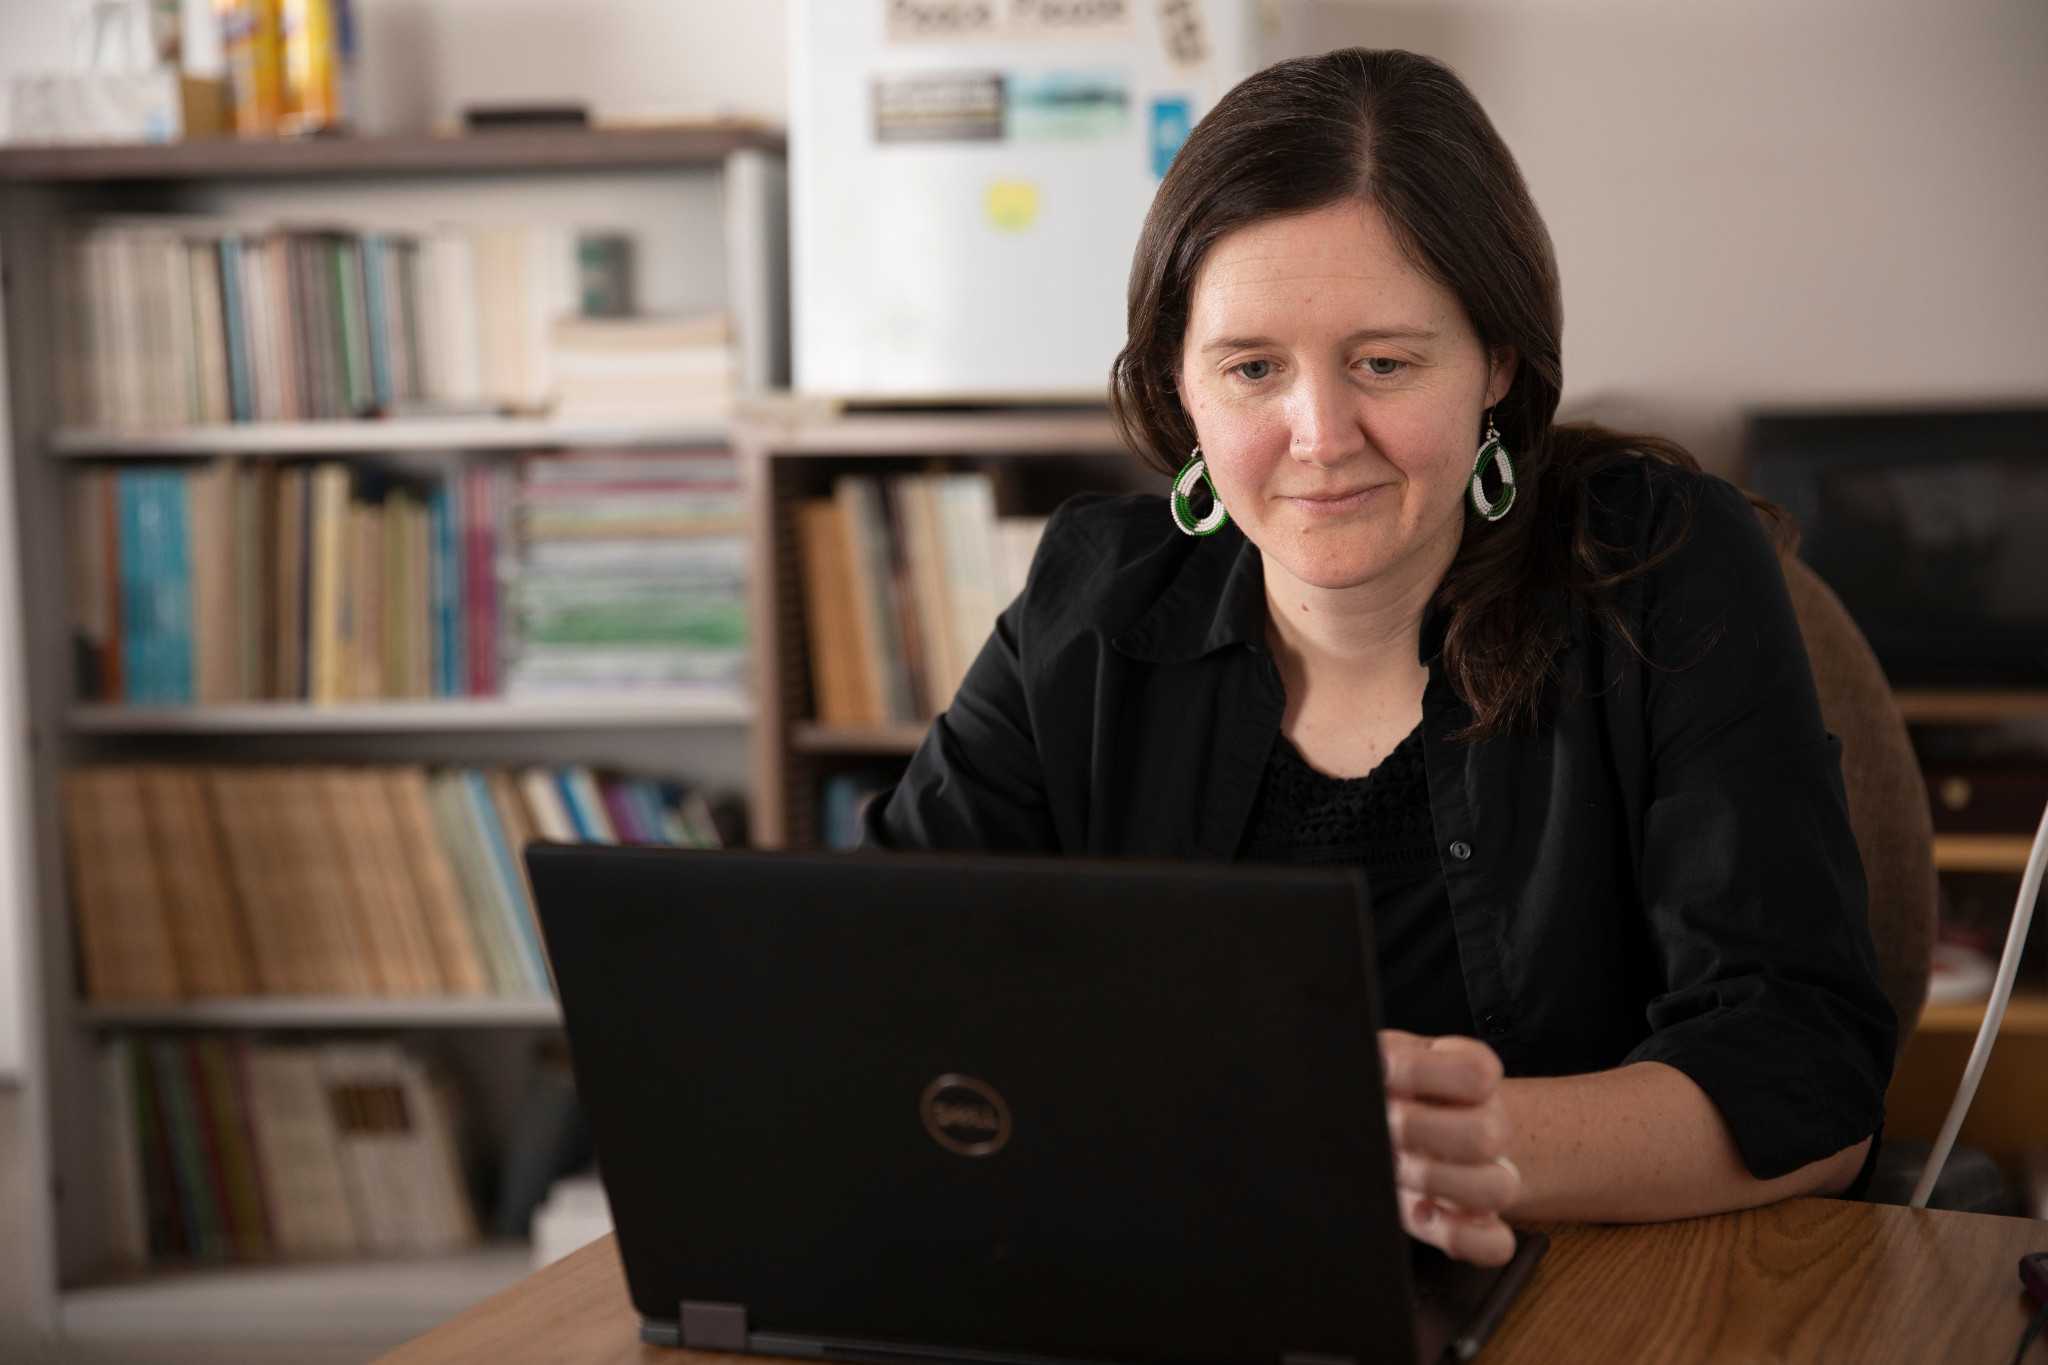 Associate Professor of Anthropology, Emery Eaves, working on their laptop